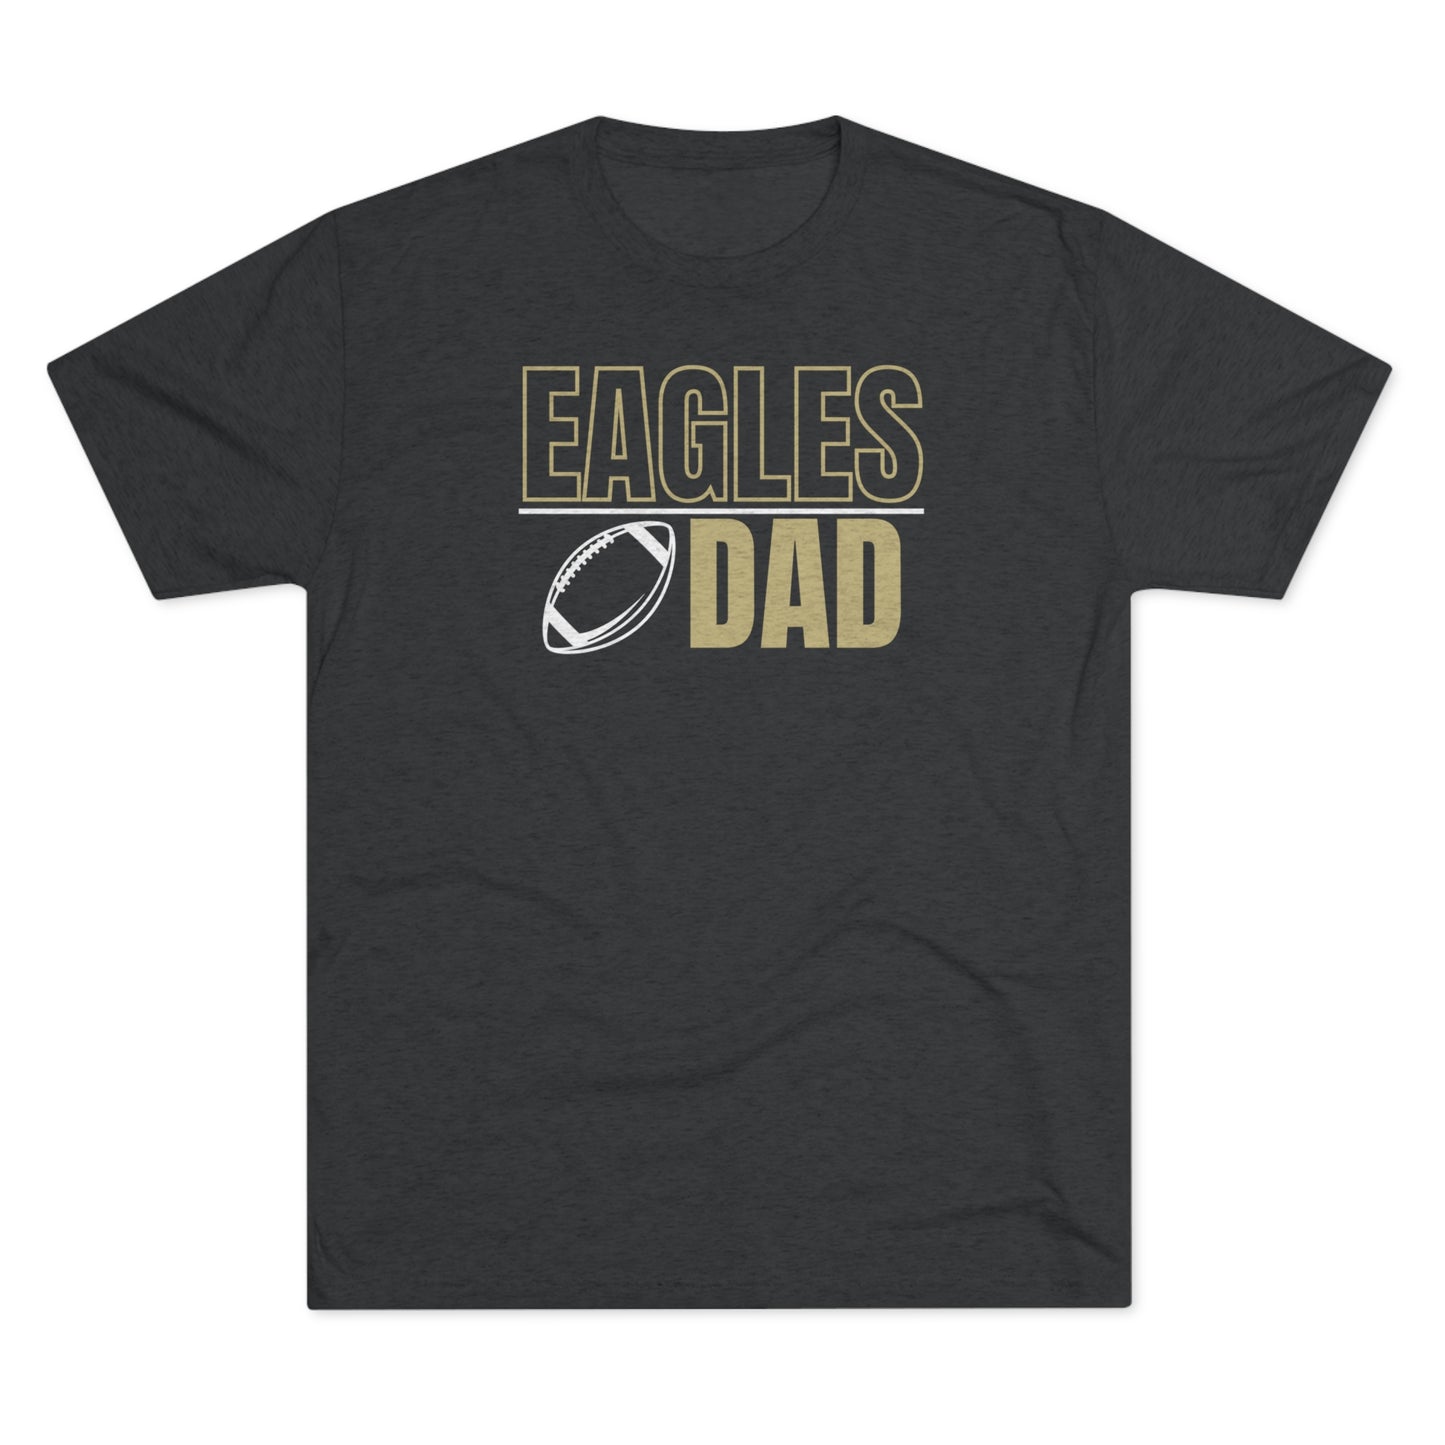 Men's Super Soft Football Dad Short Sleeve Graphic Tee - New Albany Eagles